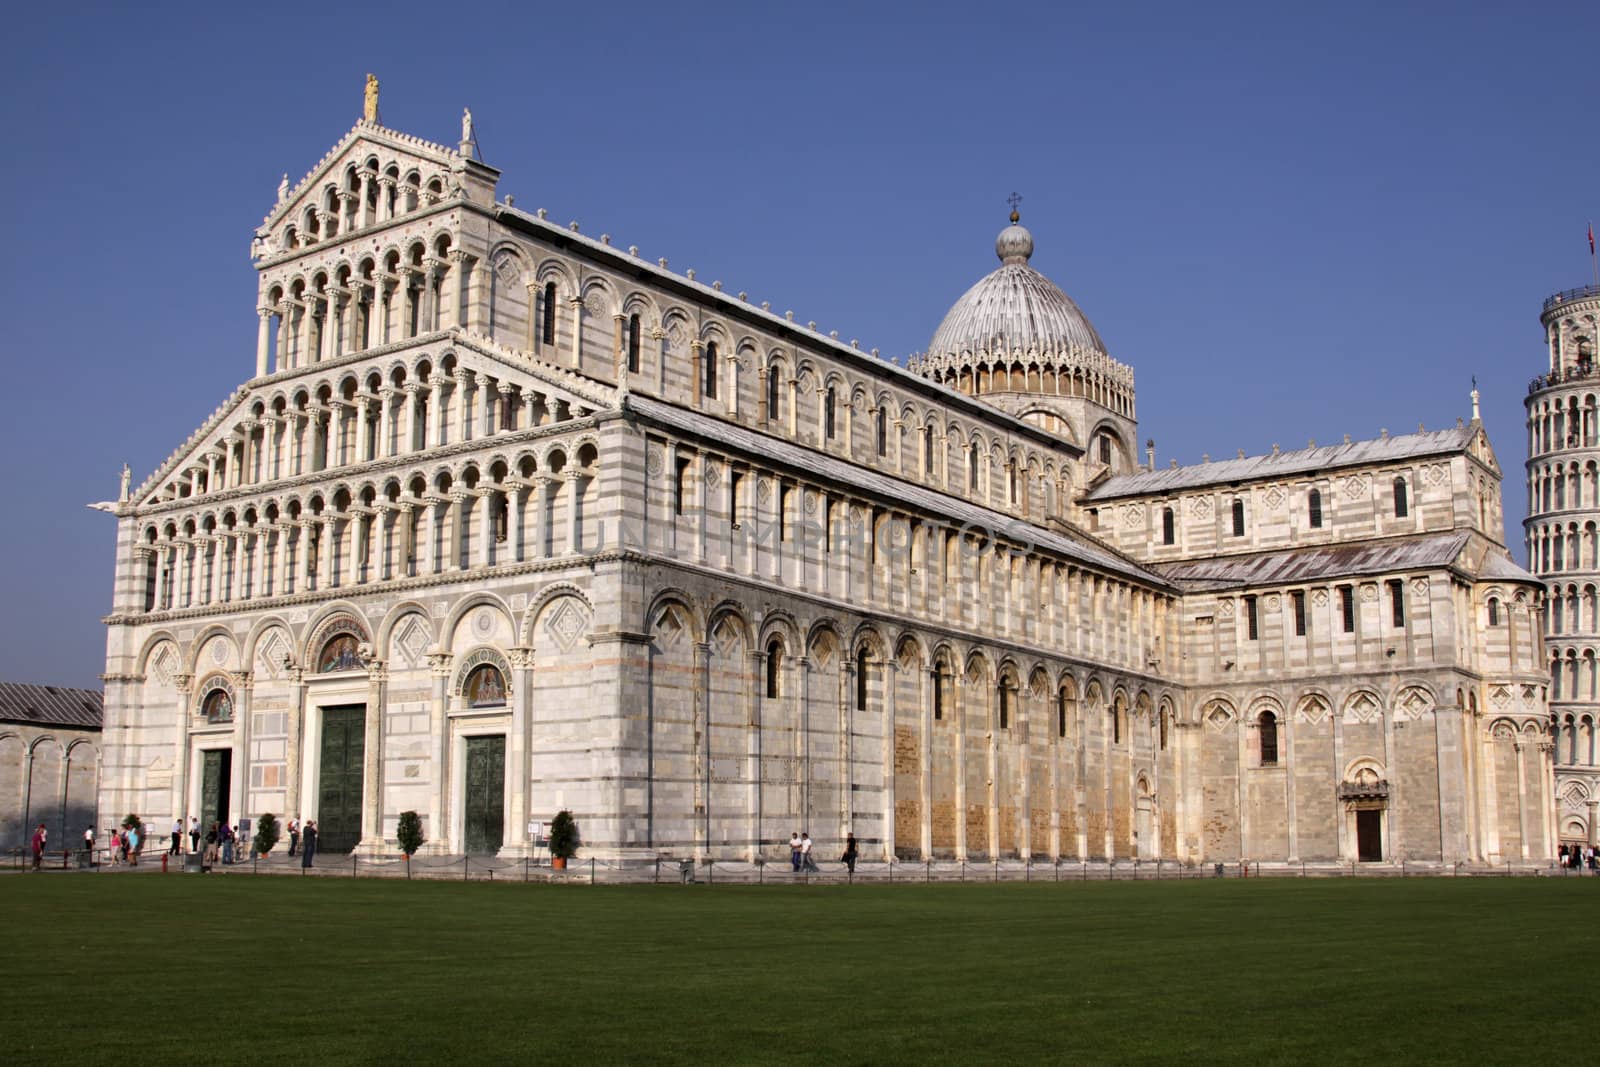 The Duomo in Pisa by ca2hill